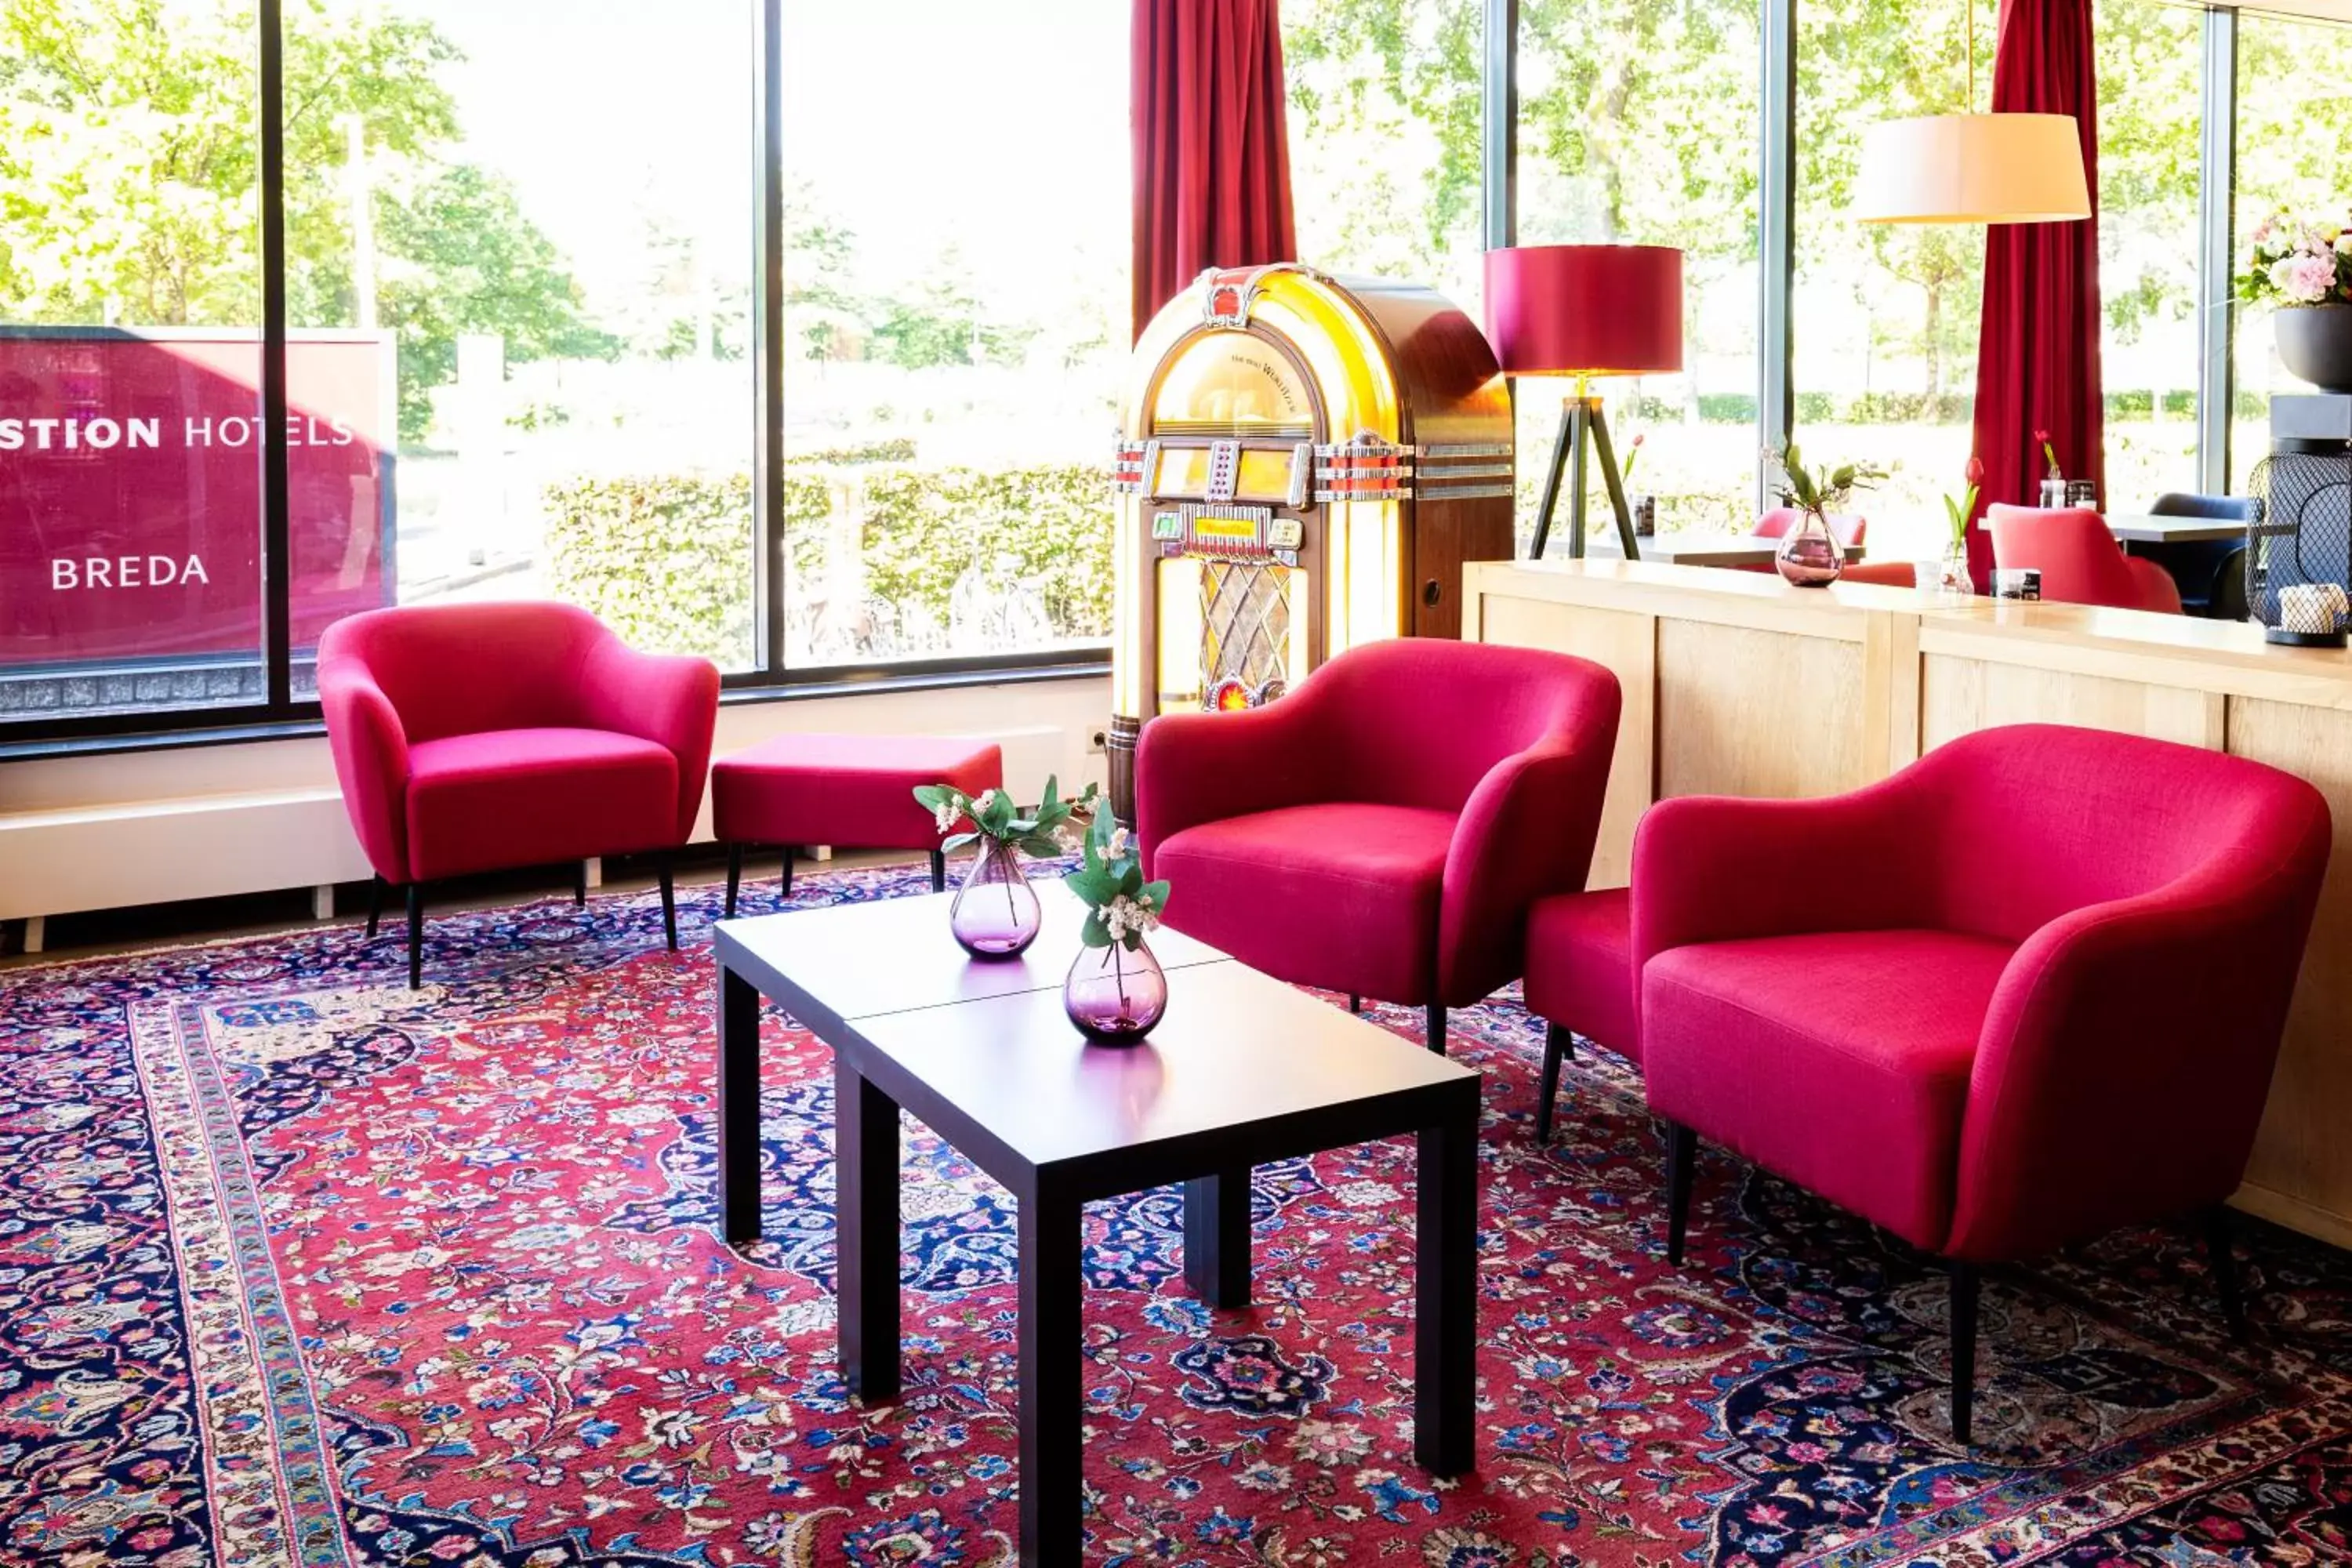 Lounge or bar, Seating Area in Bastion Hotel Breda